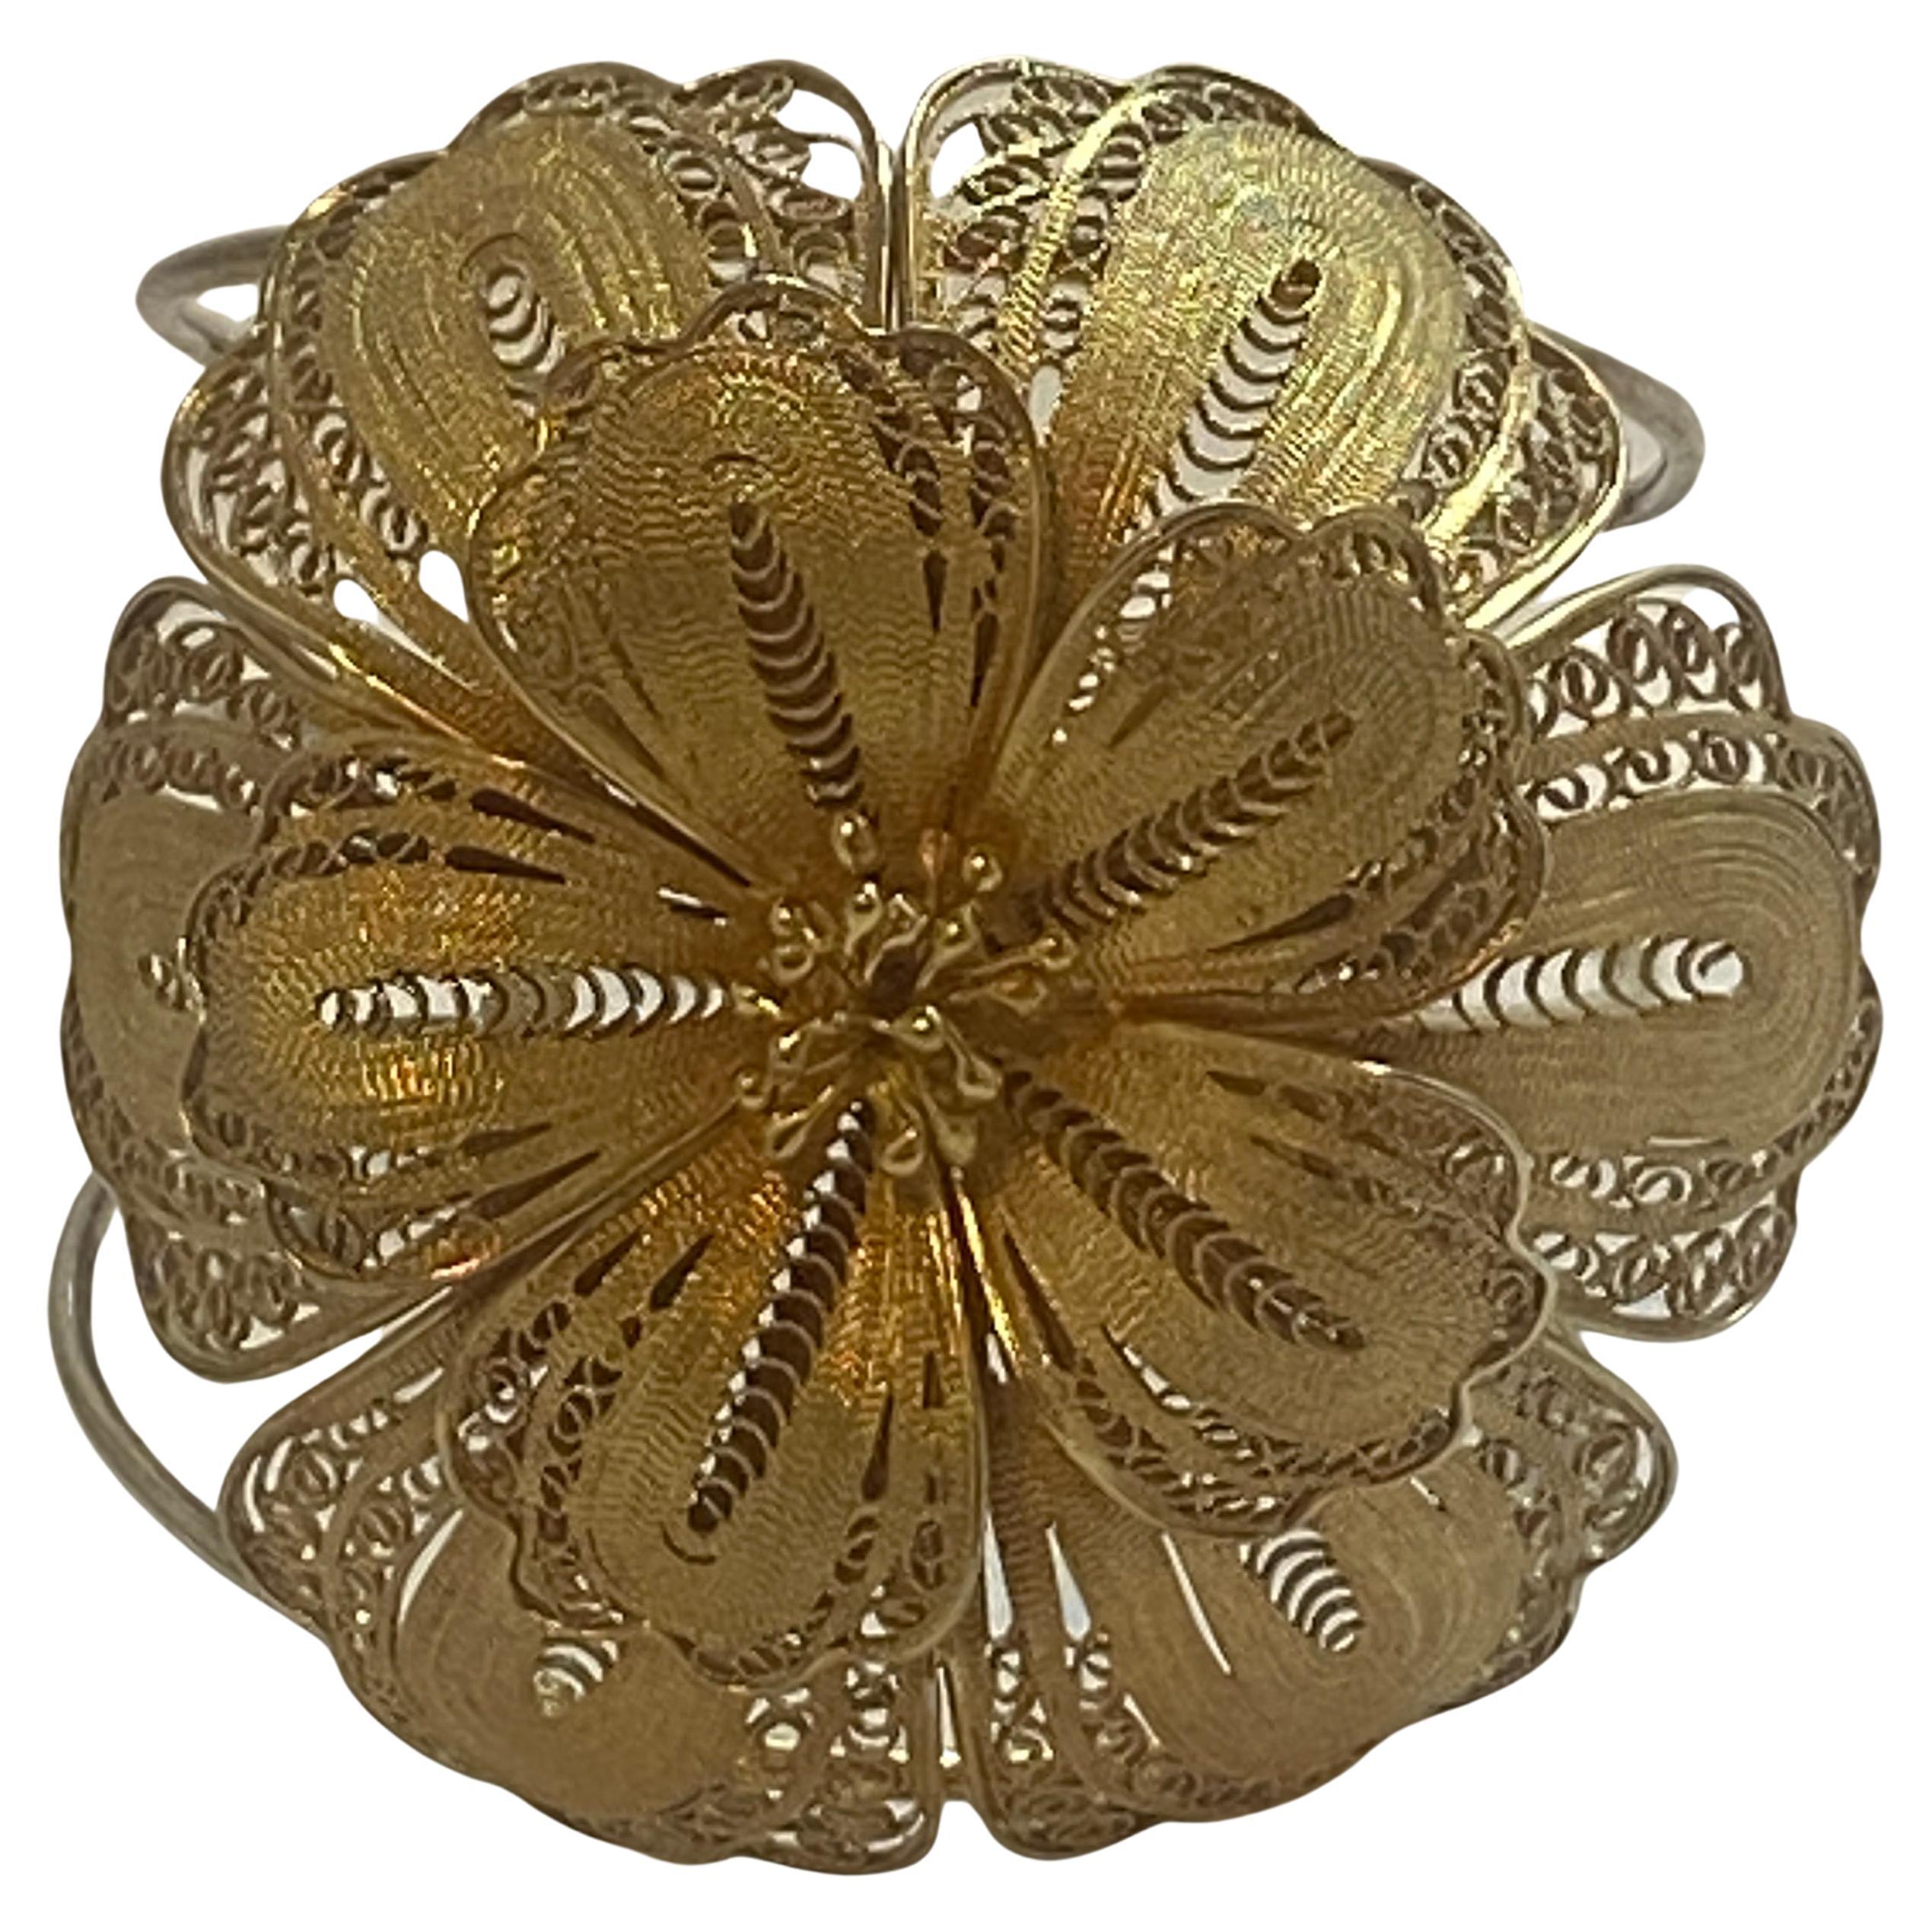 Yvone Christa Delicately "Bursting Floral" Sterling Based, Gold Overlay Cuff For Sale